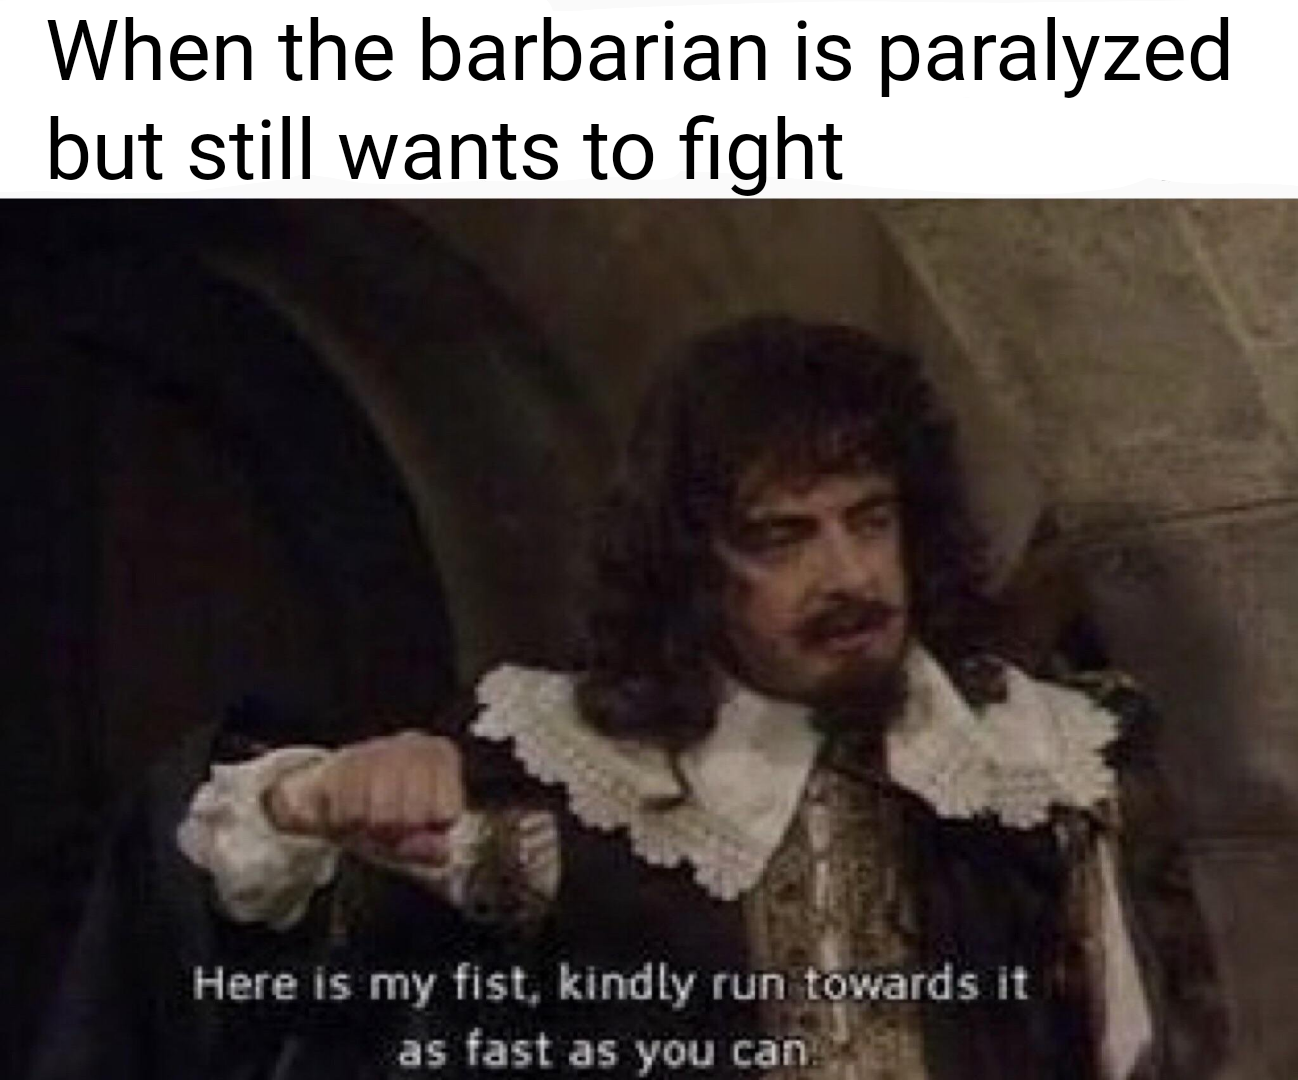 dungeons and dragons meme - When the barbarian is paralyzed but still wants to fight Here is my fist, kindly run towards it as fast as you can